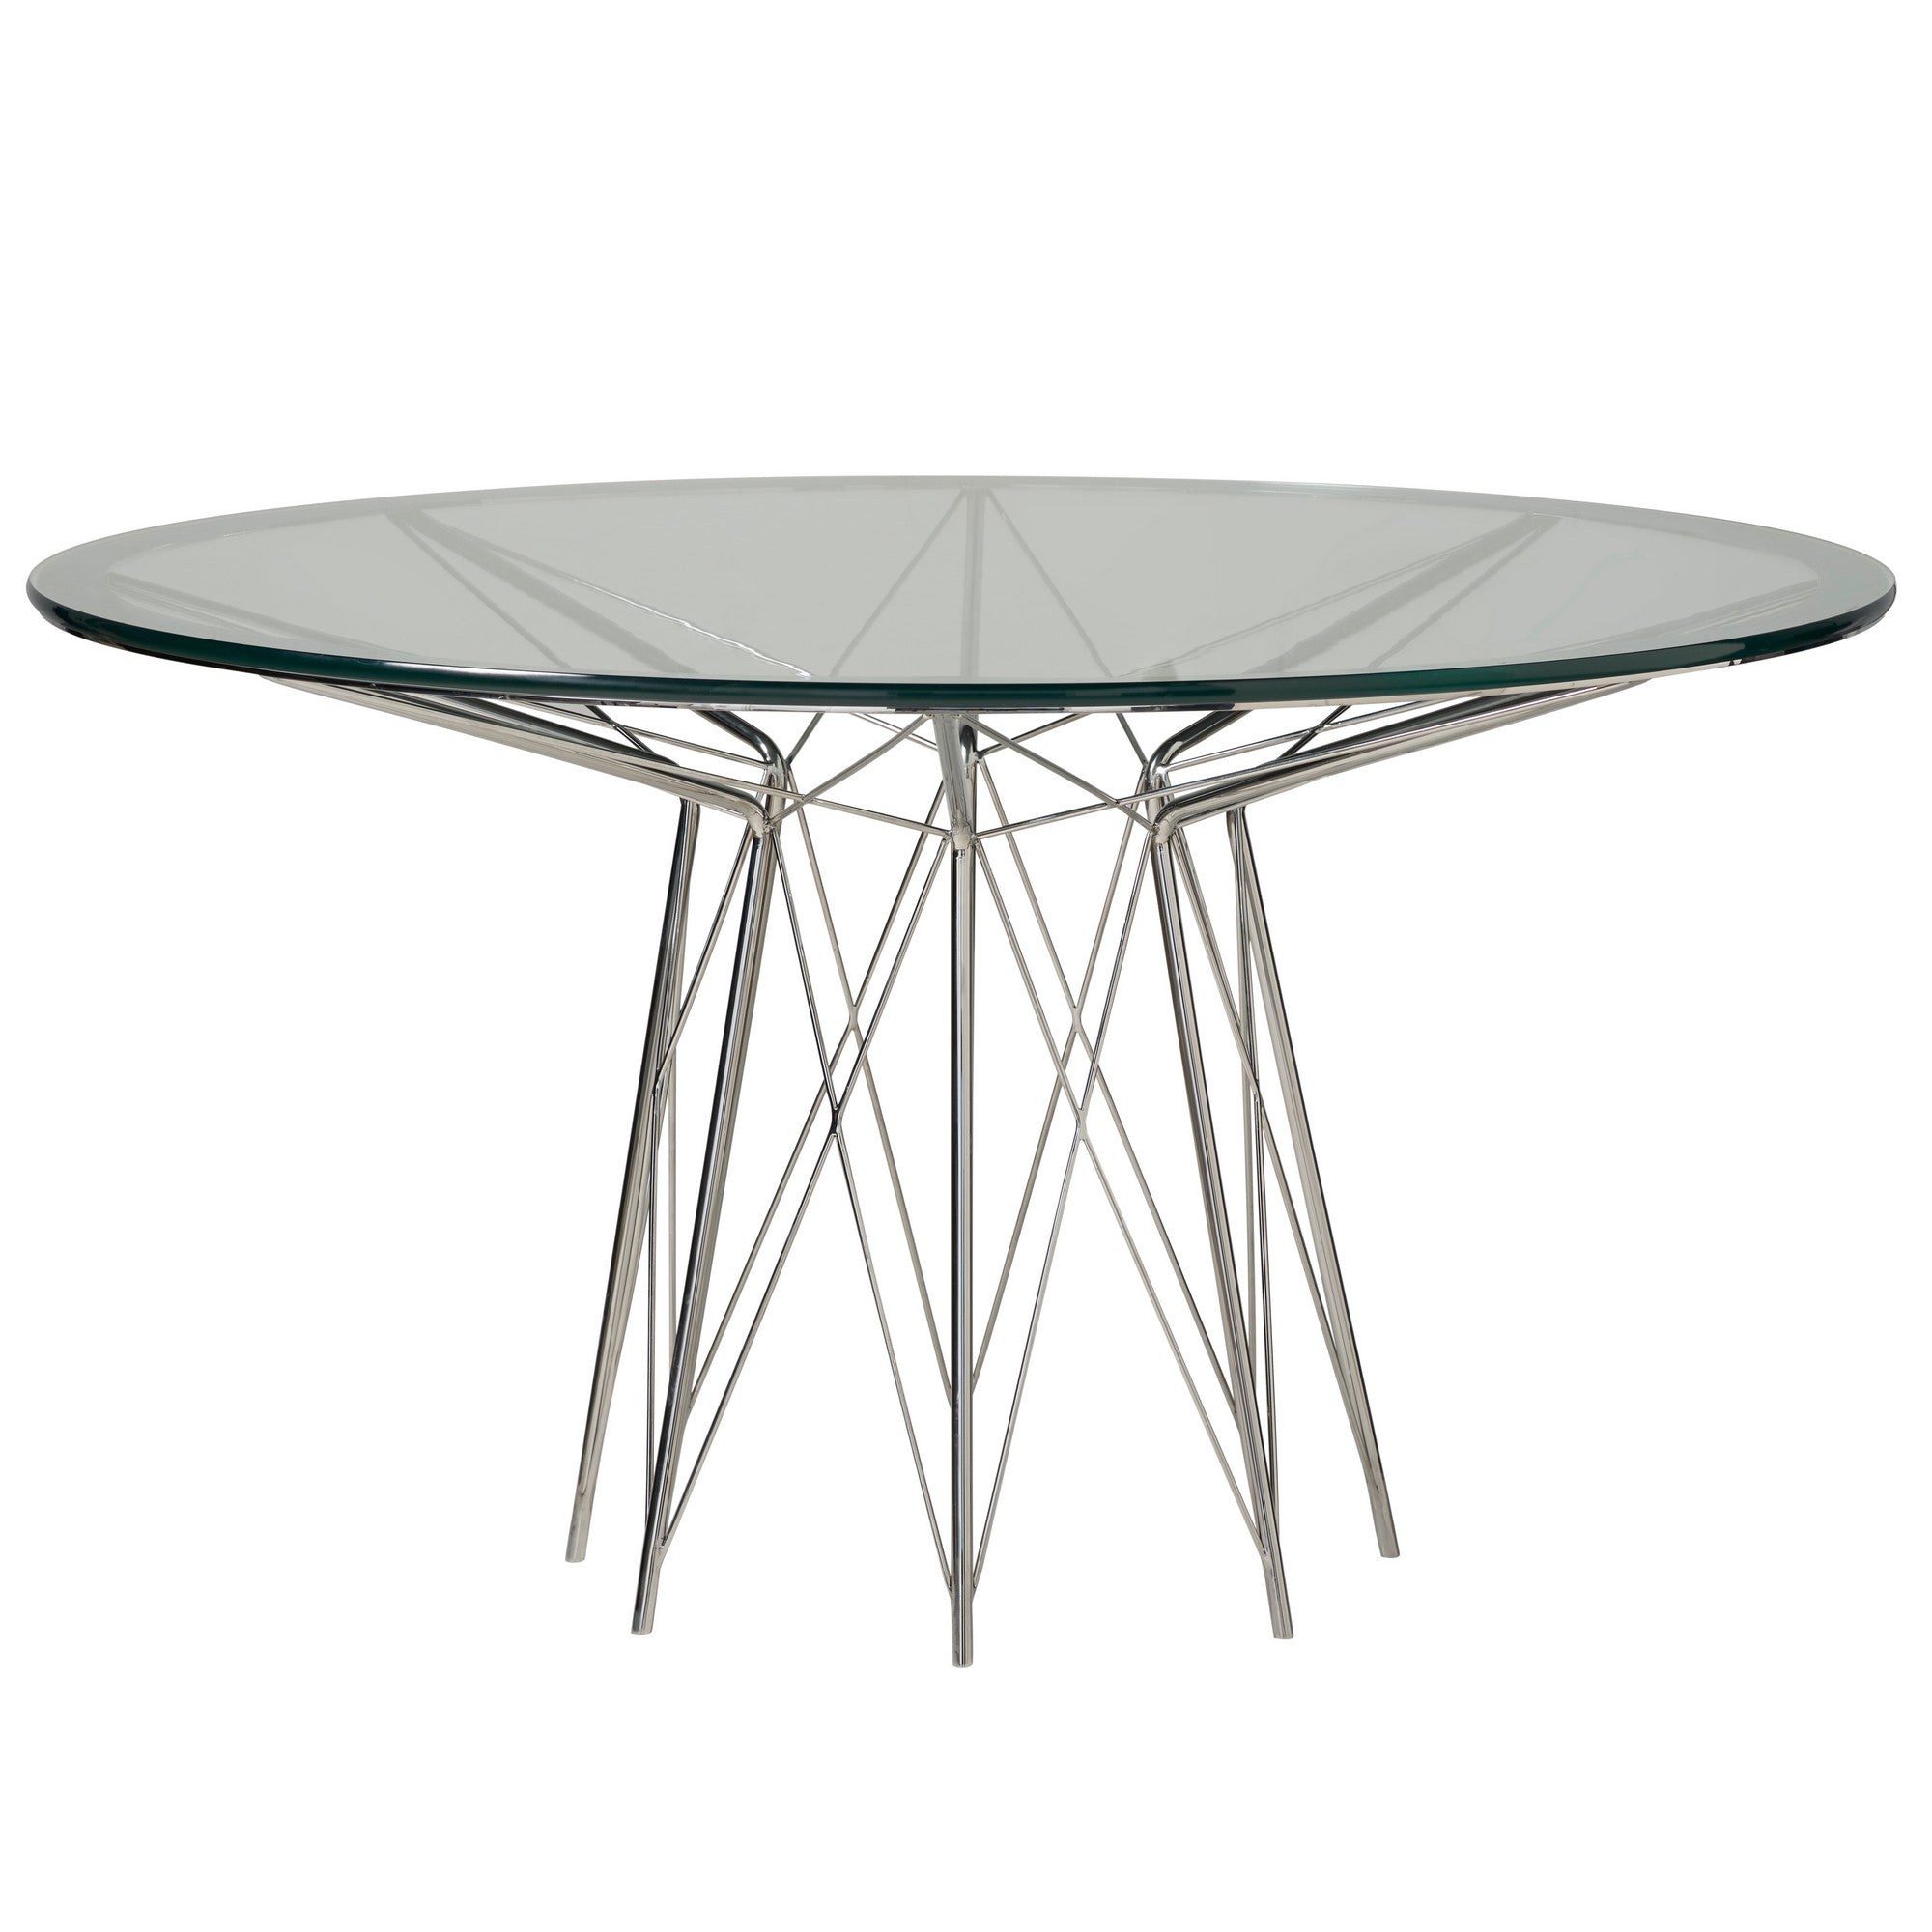 Delaney Round Dining Table - Stainless Steel